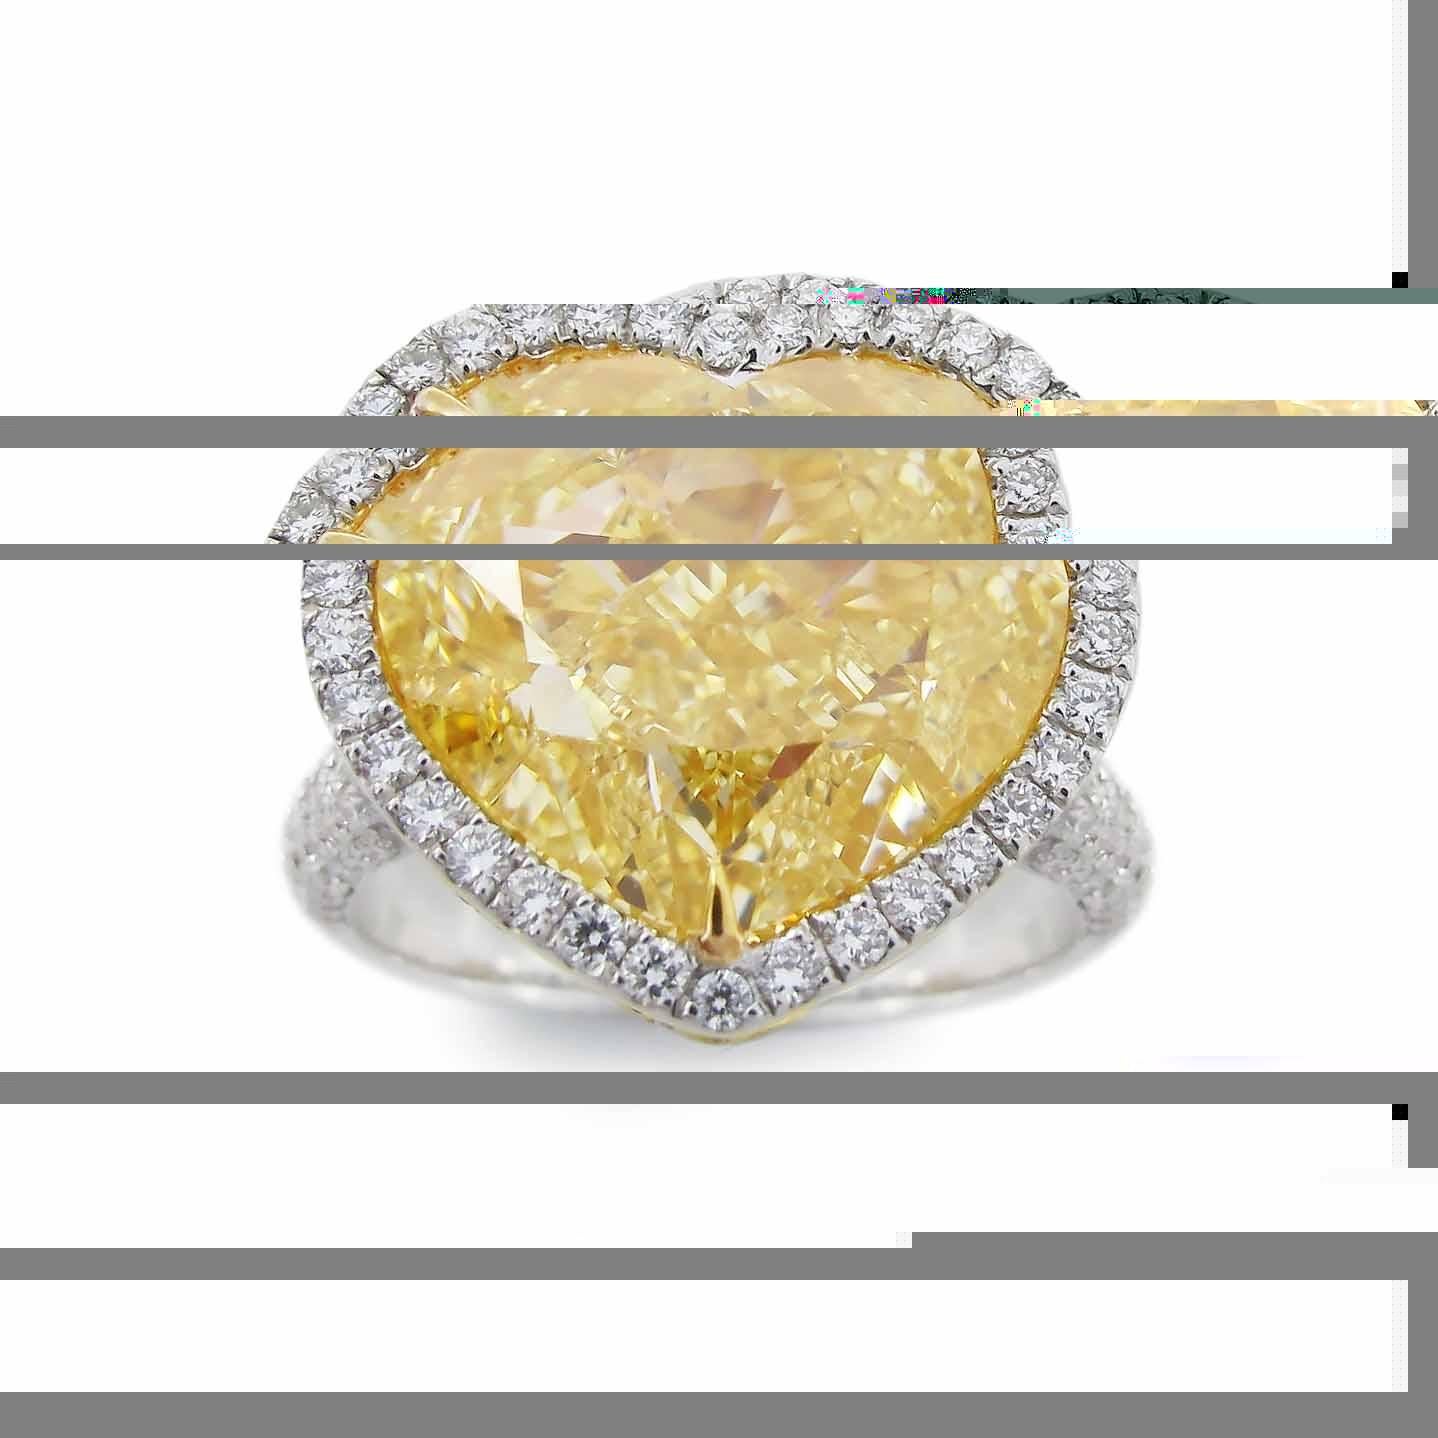 From The Museum Vault at Emilio Jewelry Located on New York's iconic Fifth Avenue,
Showcasing a very special and rare Gia certified natural fancy yellow heart shape diamond set in the center. Hand made in the Emilio Jewelry Atelier, whom specializes